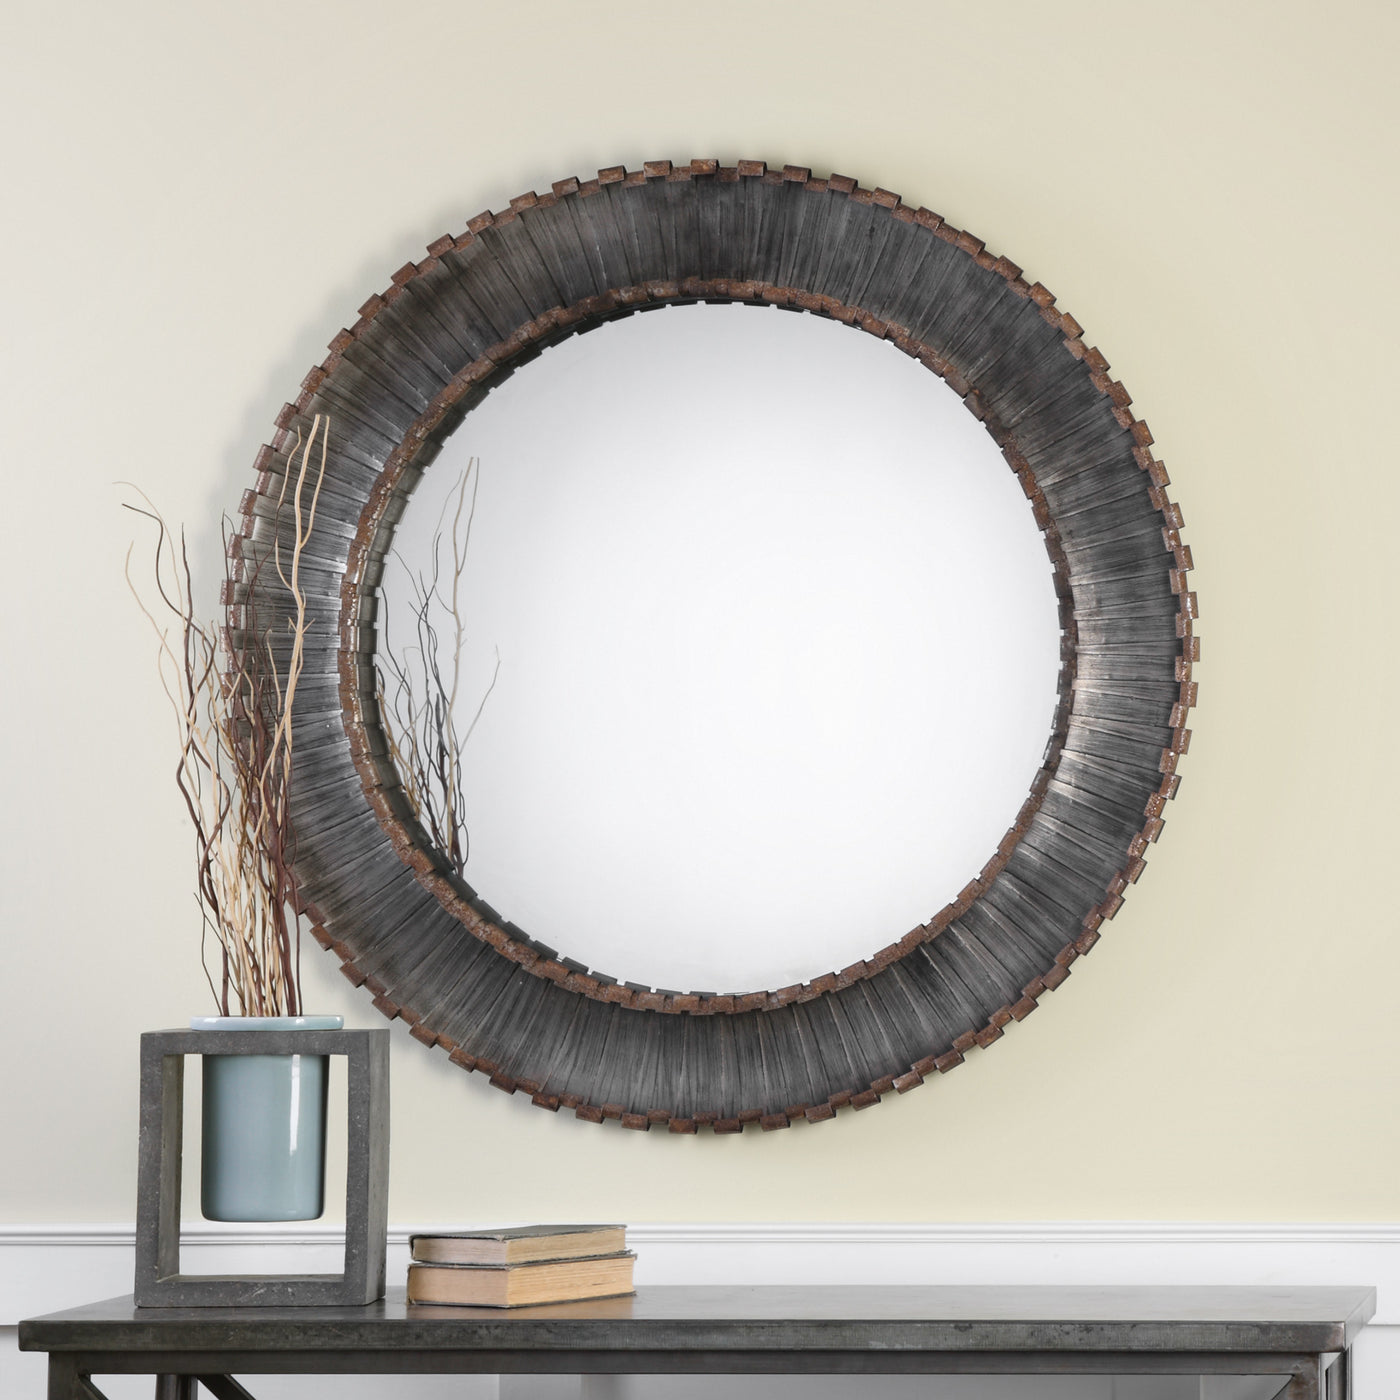 Hand Forged Strips Of Metal, In Staggered Lengths And Curled At Both Ends, Are Used To Create This Frame. Finish Consists ...